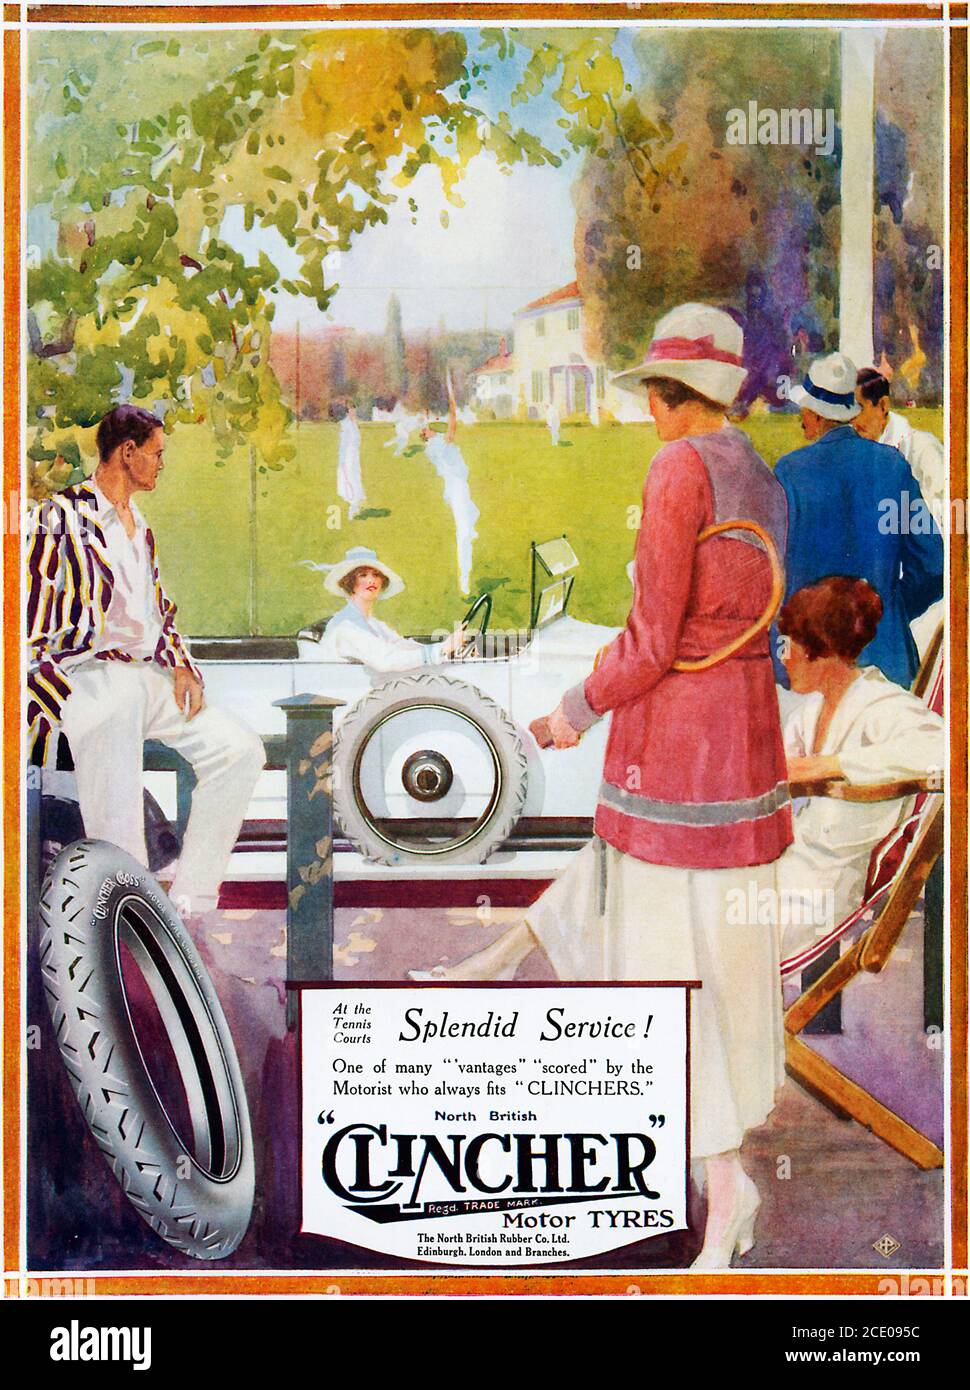 Clincher Tyres, Tennis, 1919 magazine advert for post-war tyres and an associated life of leisured activity with tennis on the lawn, splendid service at the courts Stock Photo